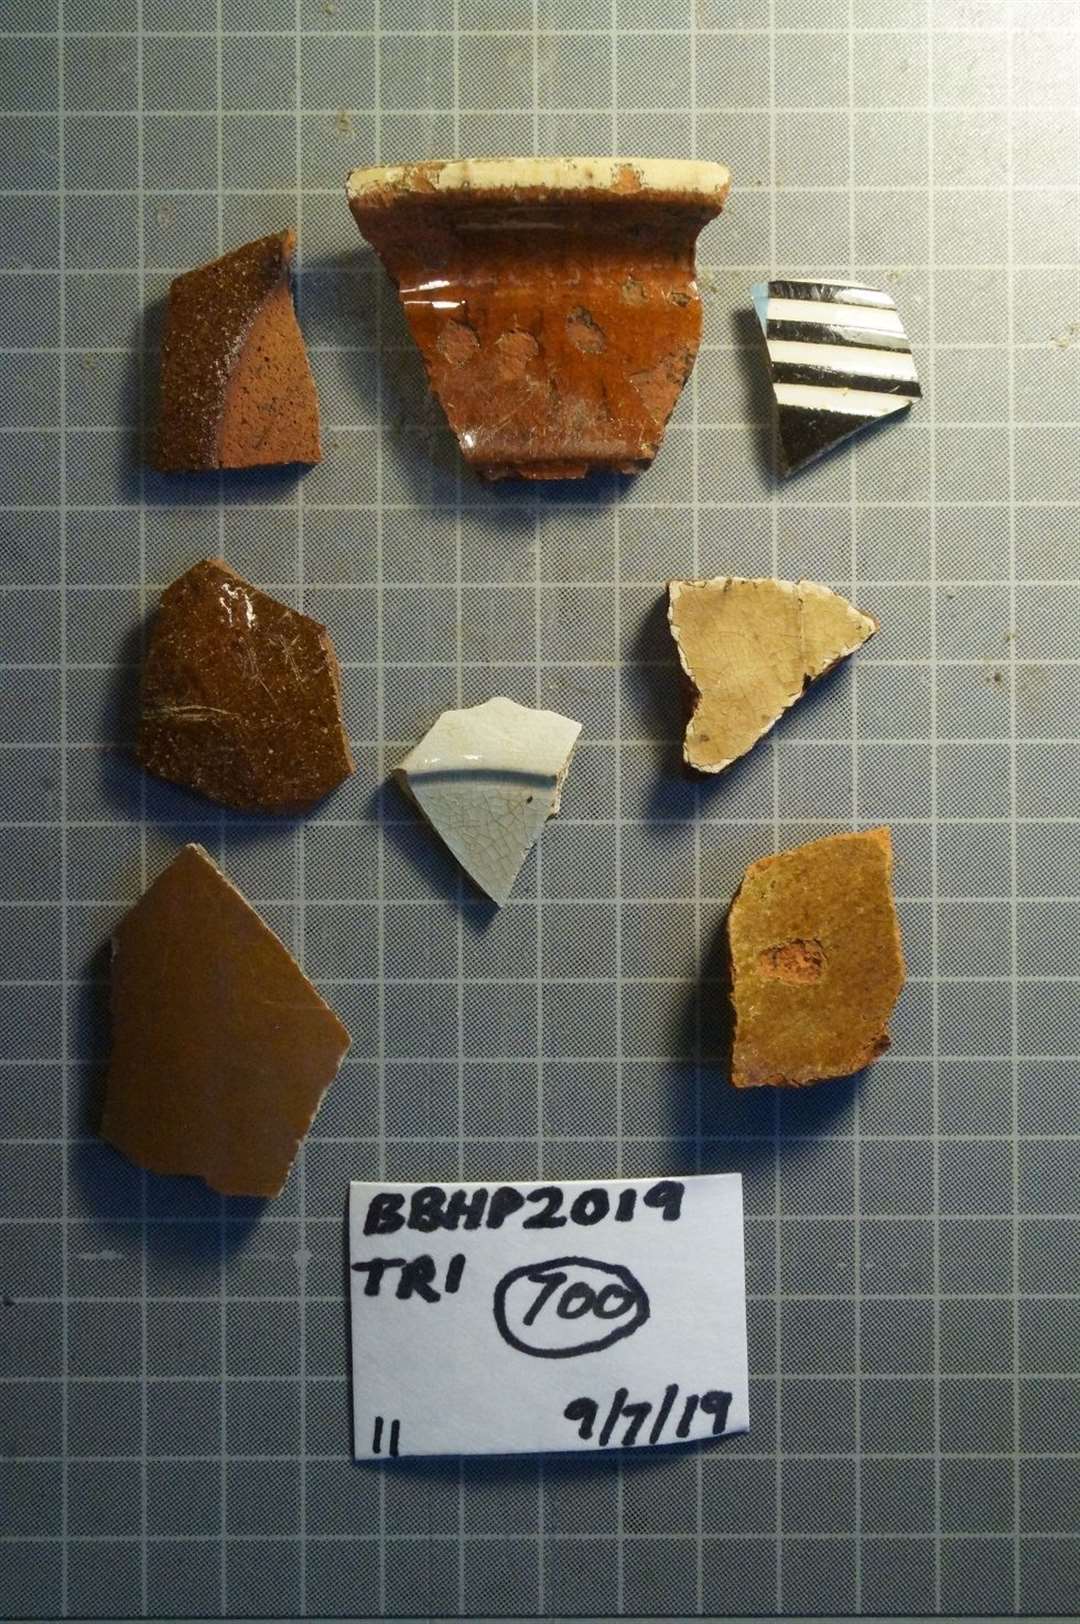 Some of the earthenware artefacts unearthed during the dig.